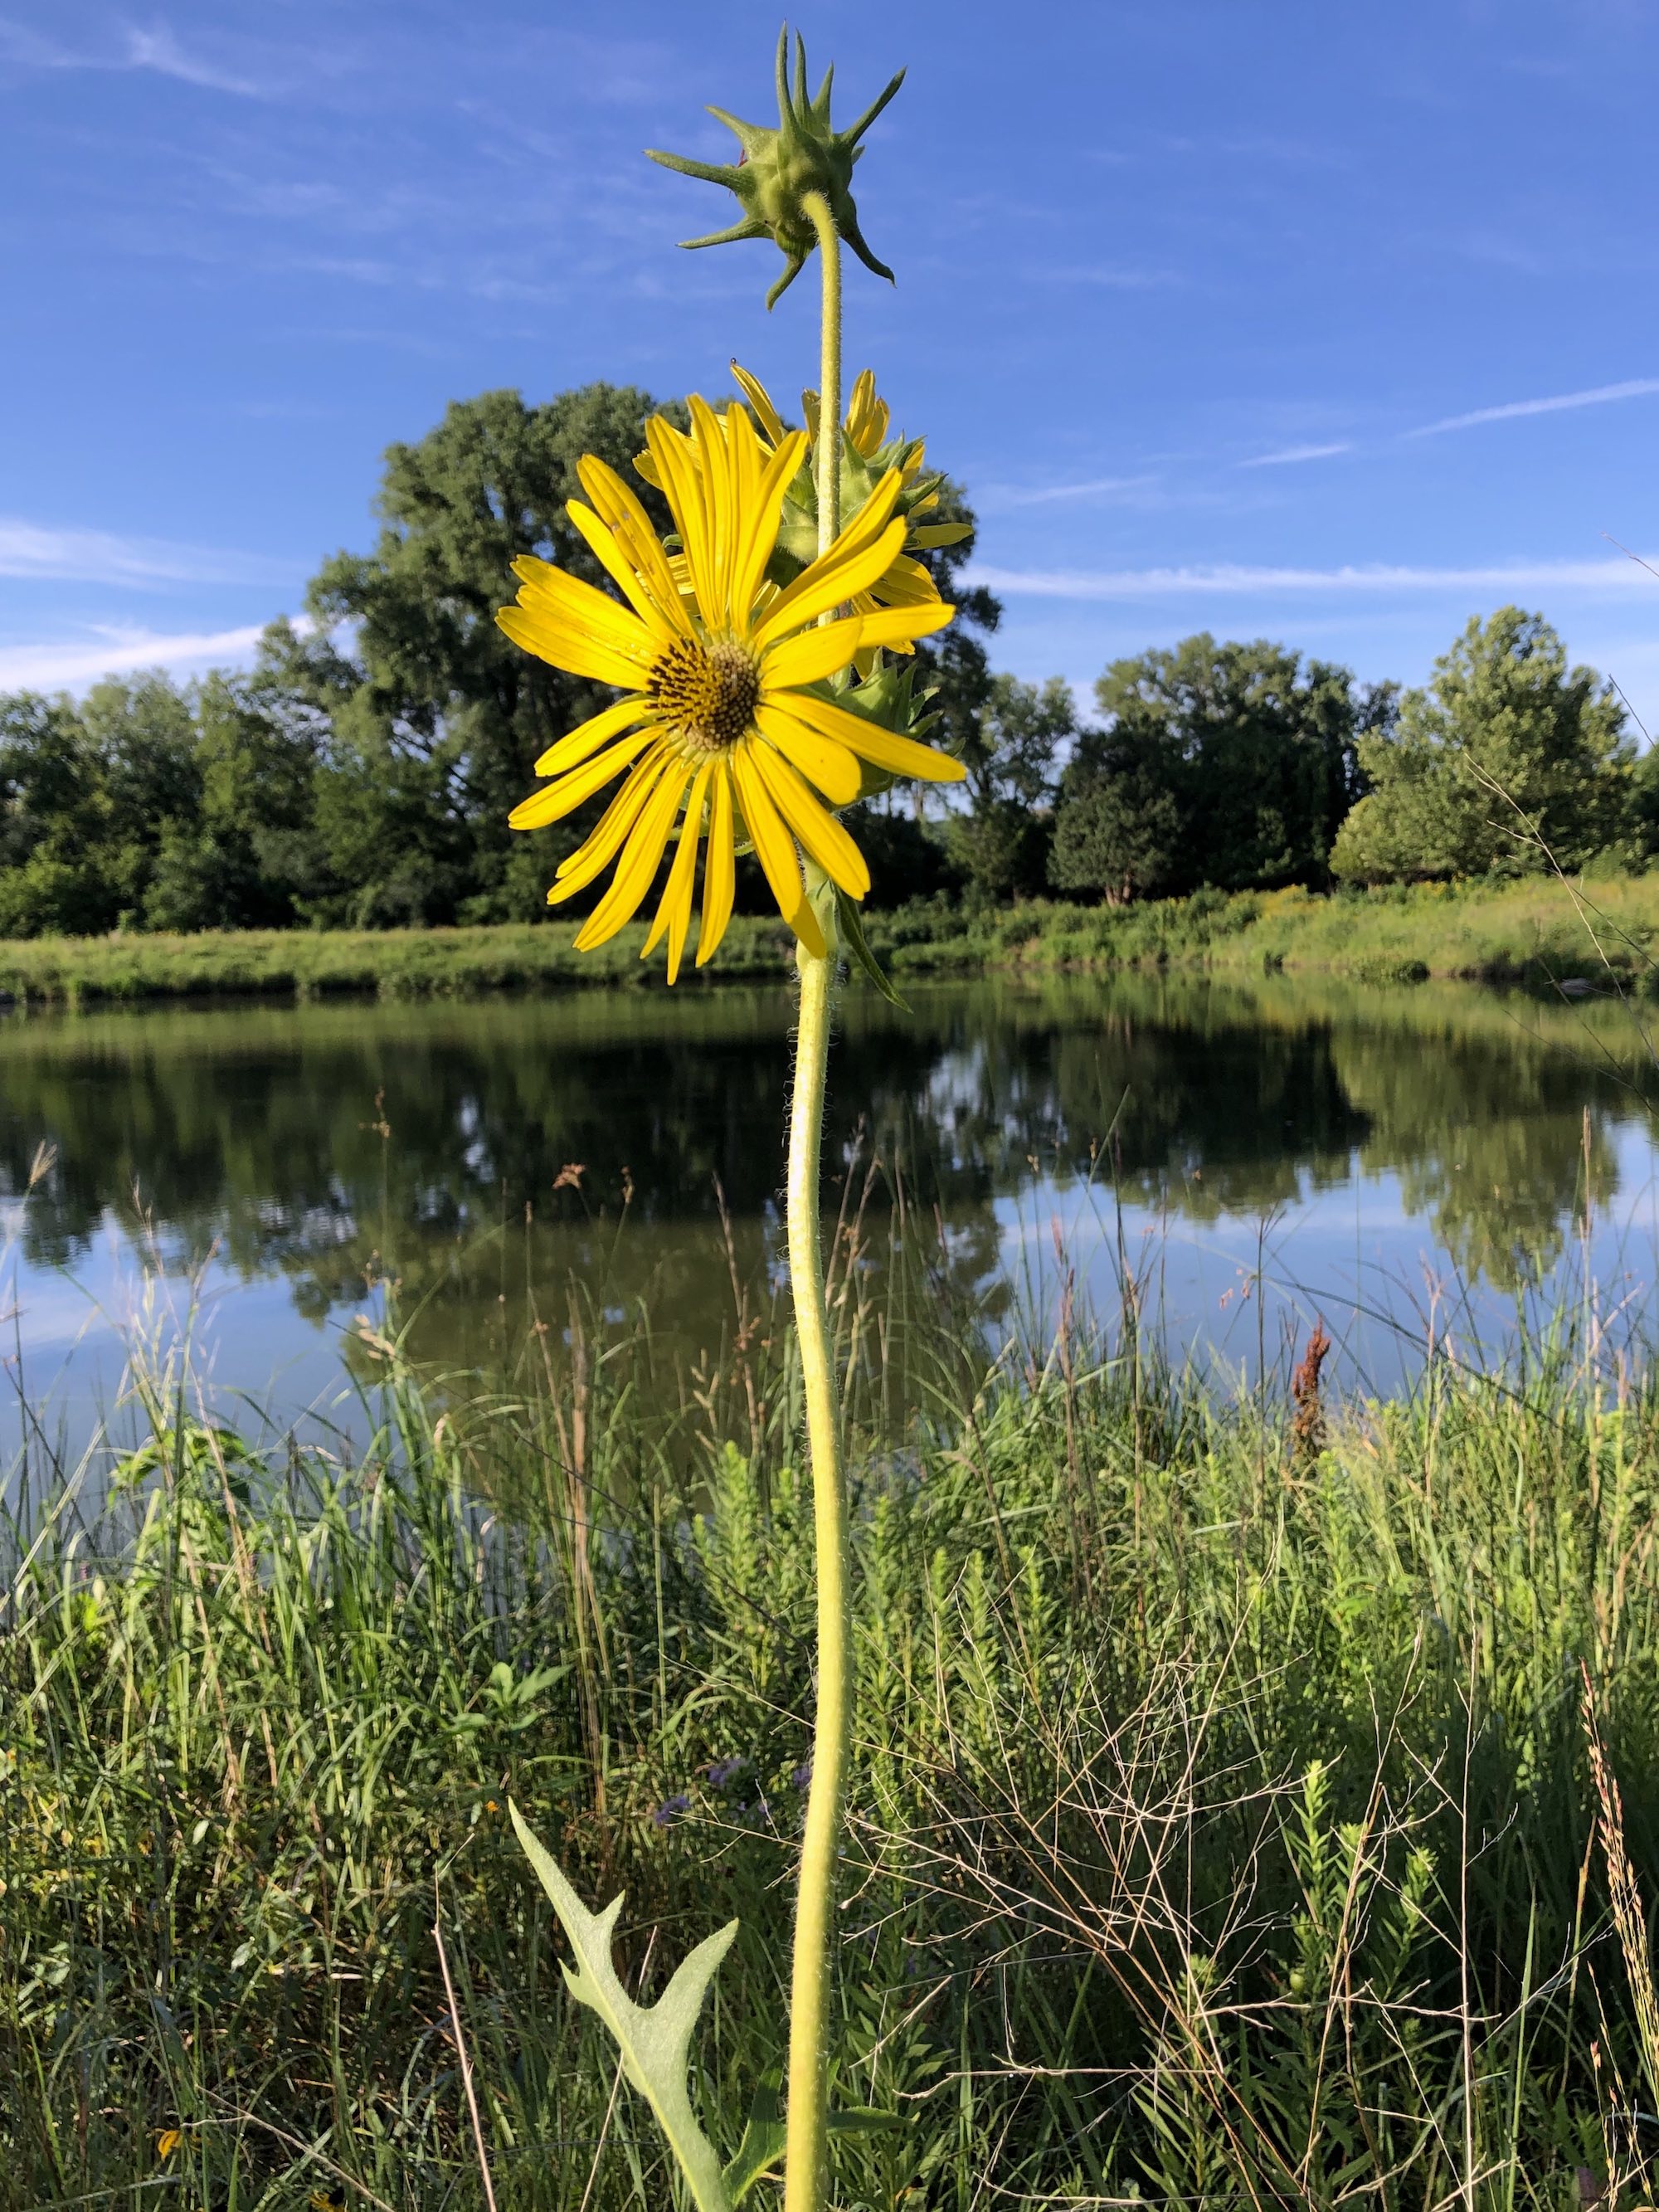 Compass Plant on the shore of the retaining pond on the corner of Nakoma Road and Manitou Way in Madison, Wisconsin on July 31, 2020.